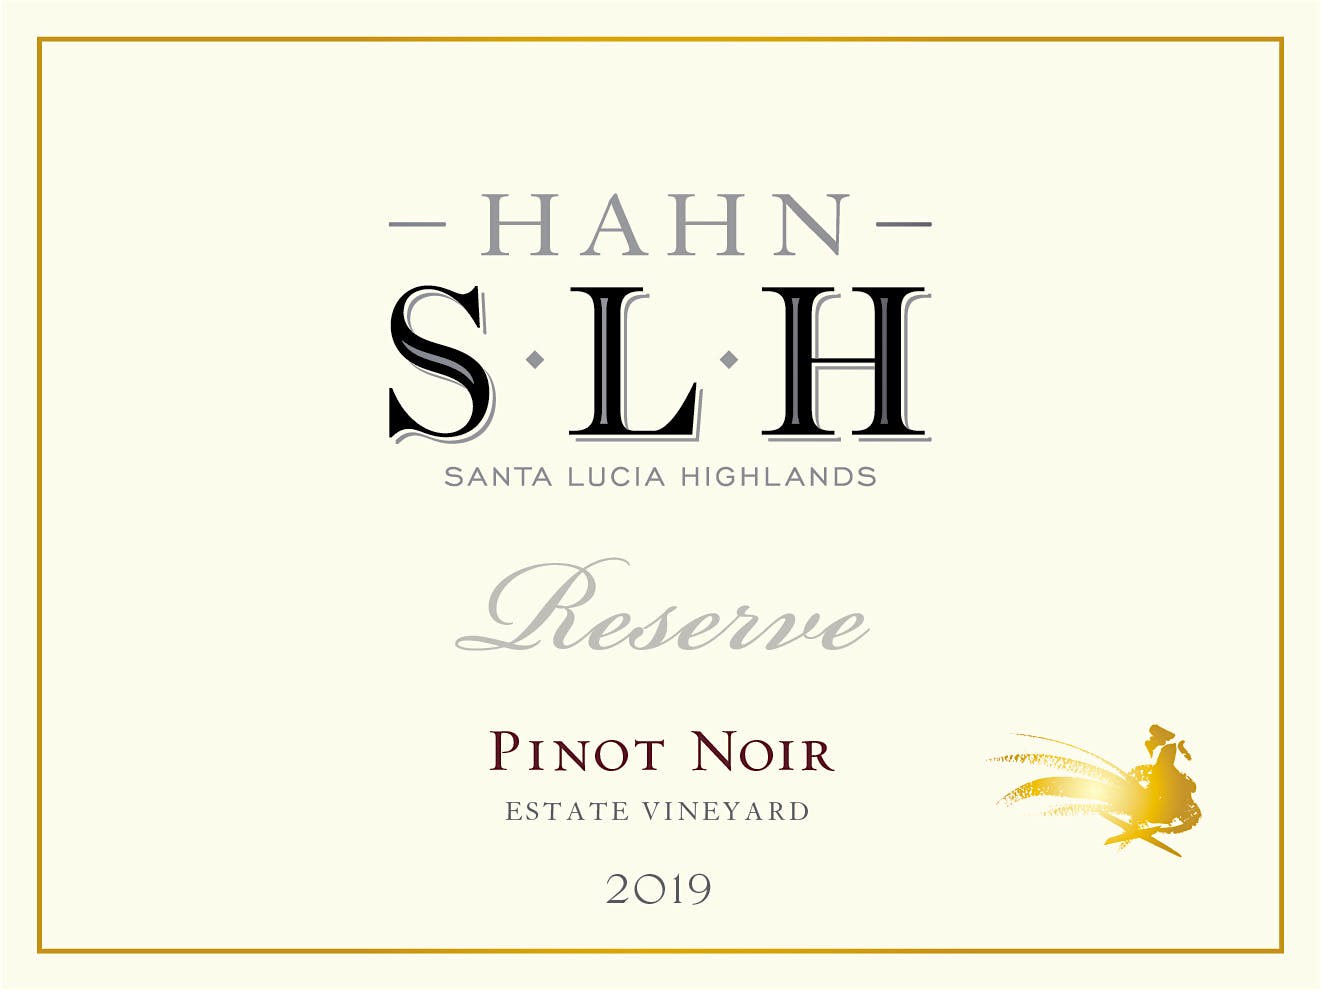 Label for Hahn